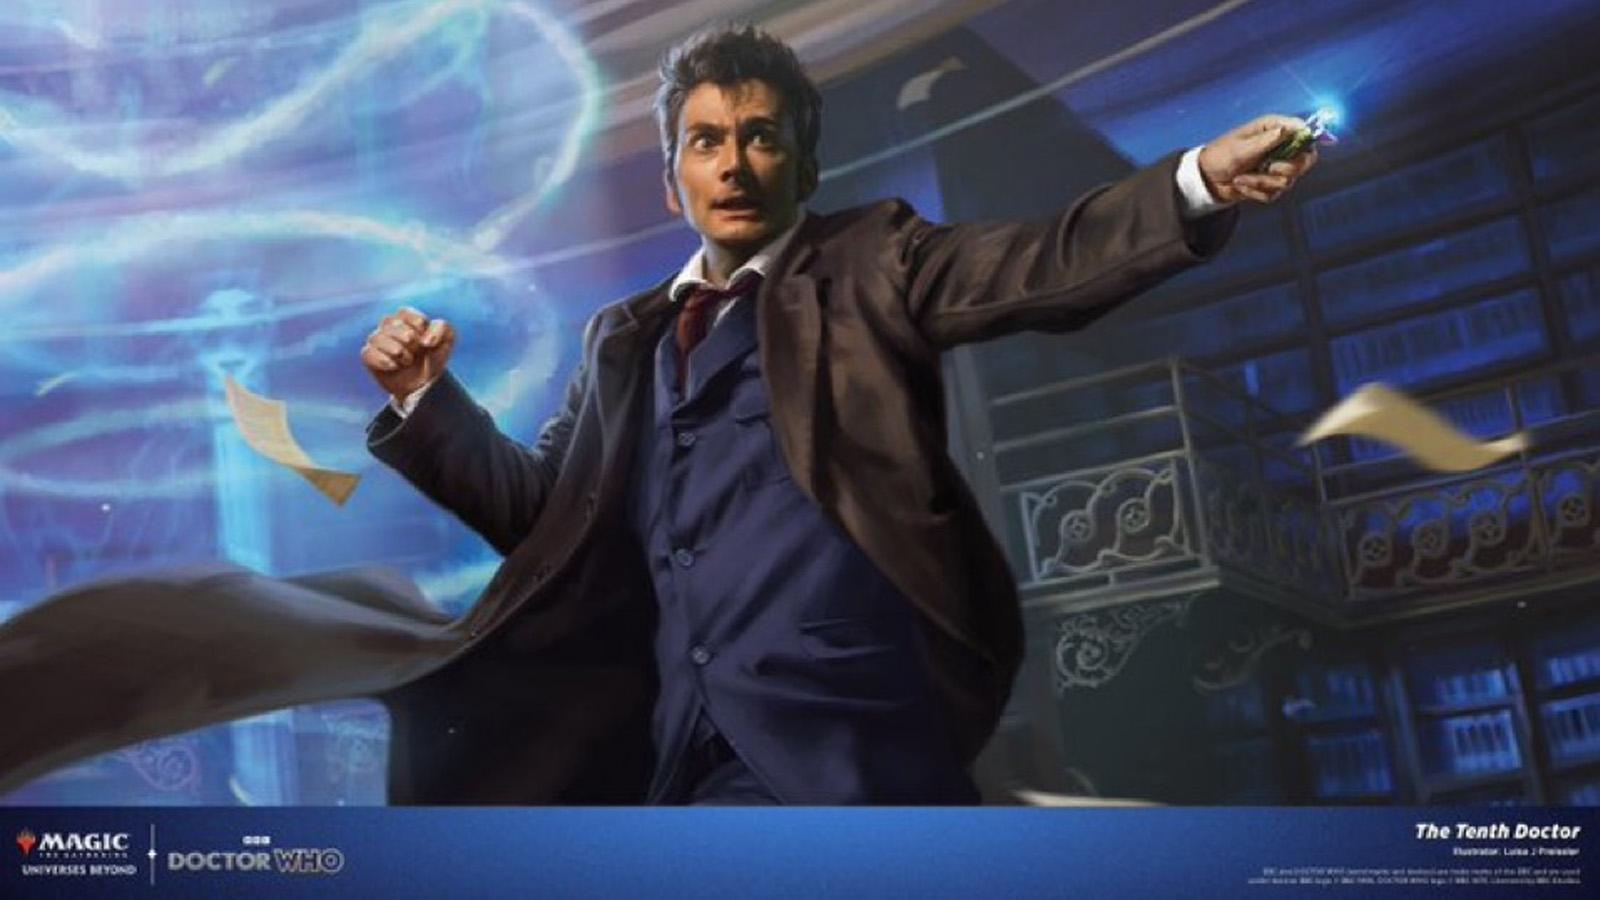 Magic The Gathering doctor who